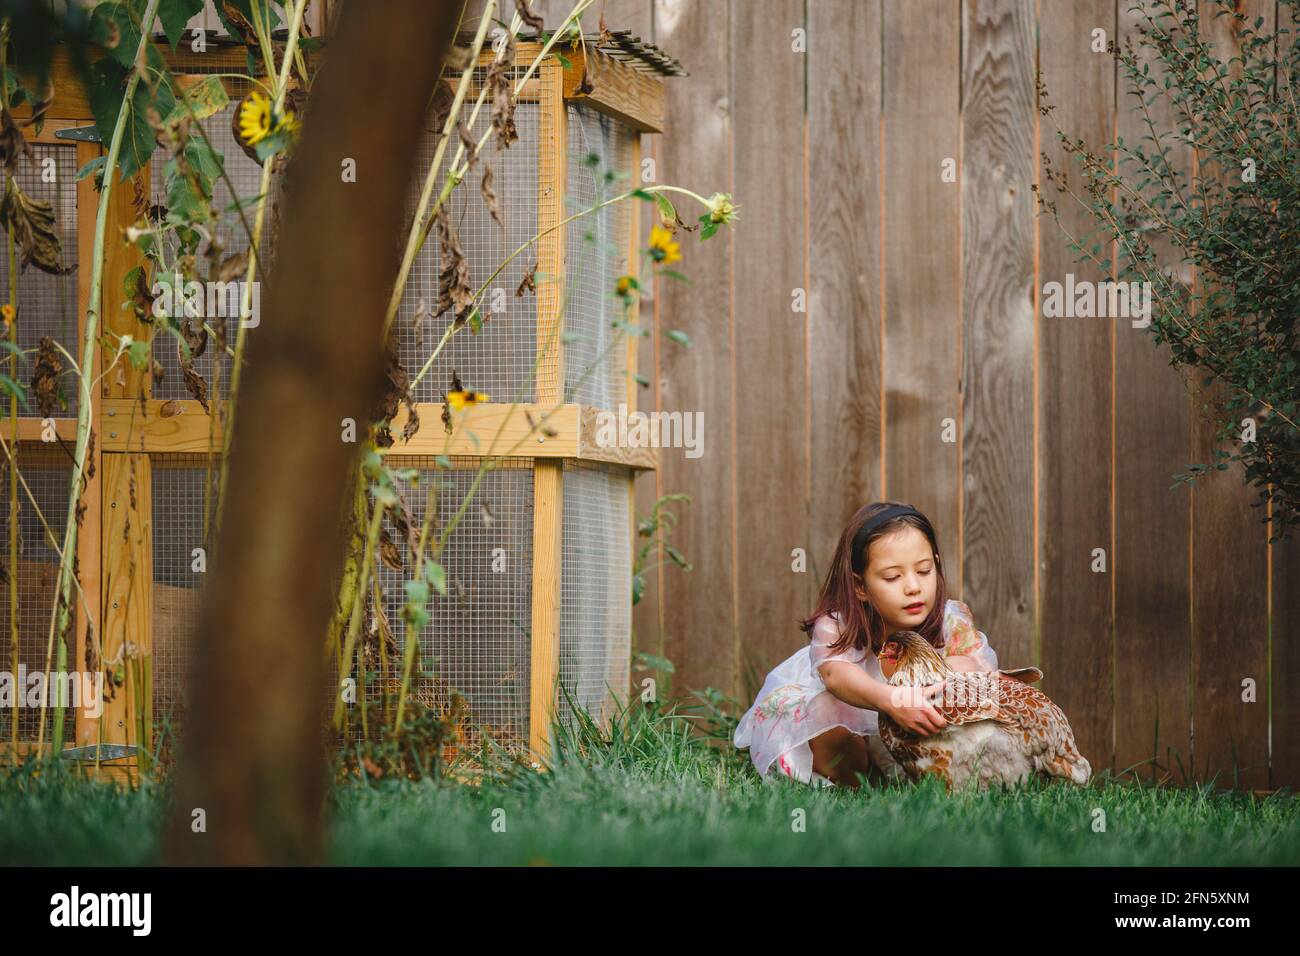 A beautiful little girl kneels down in grass to pick up a chicken Stock Photo